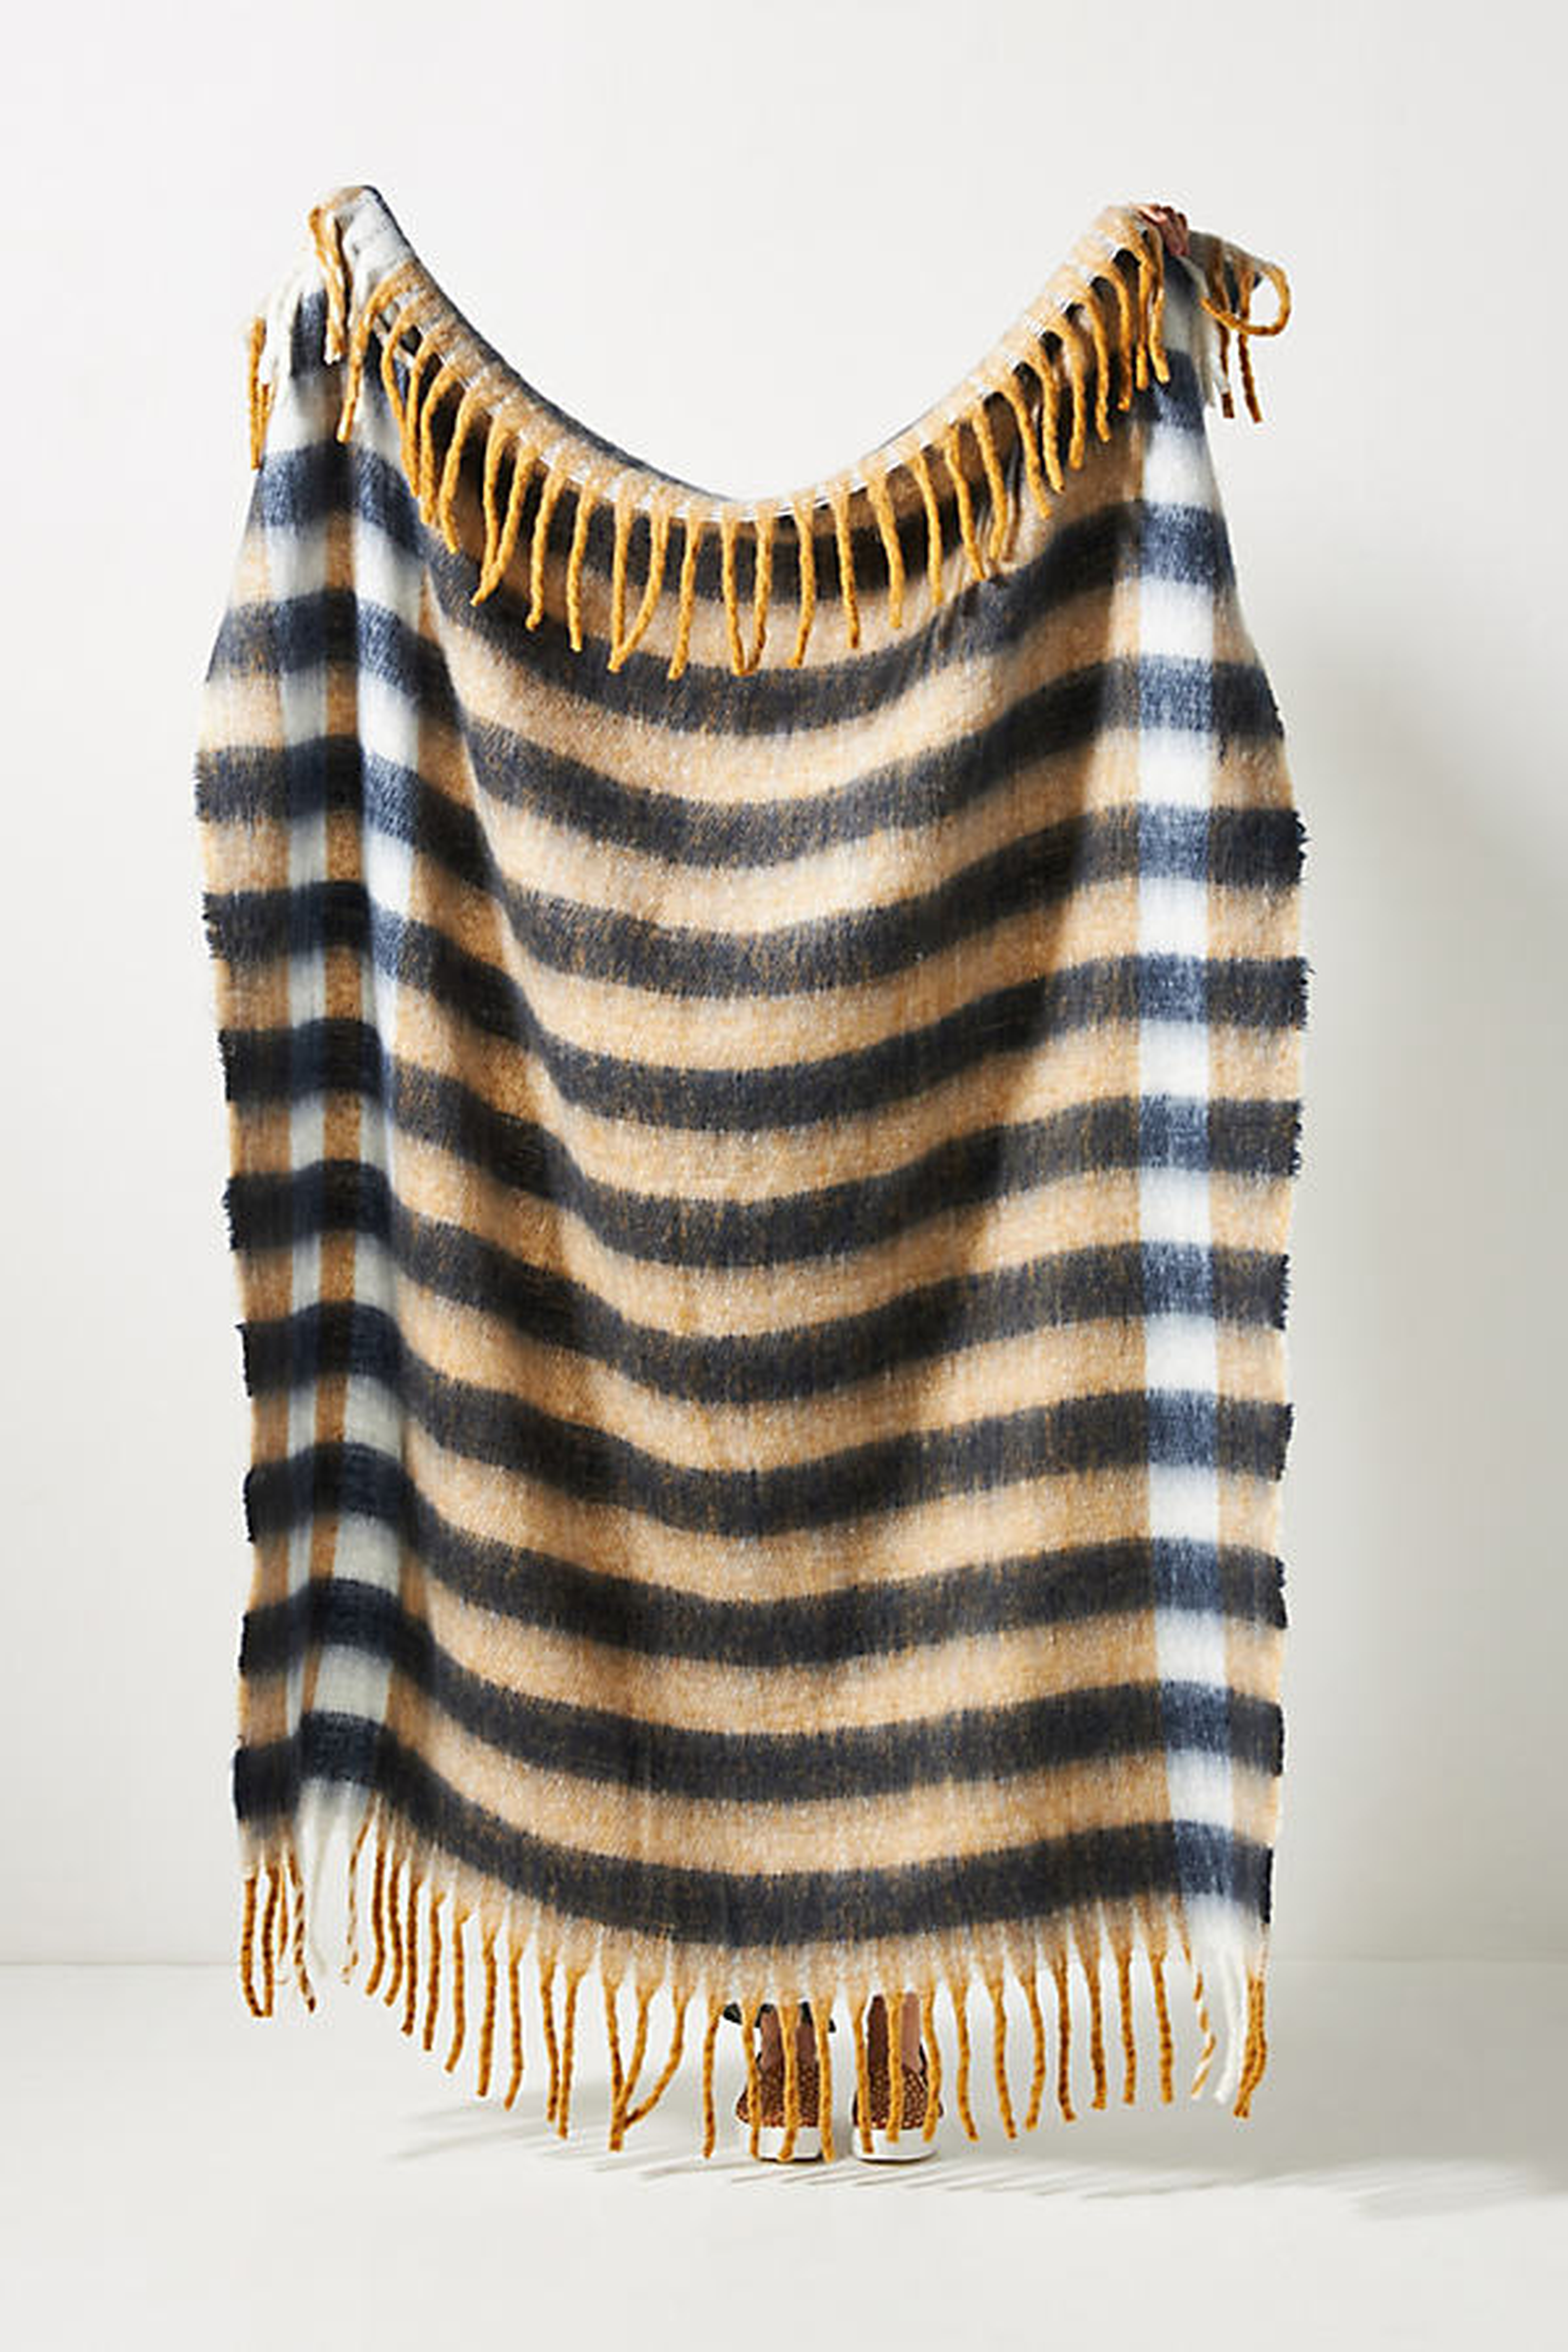 Rives Striped Throw Blanket By Anthropologie in Yellow - Anthropologie